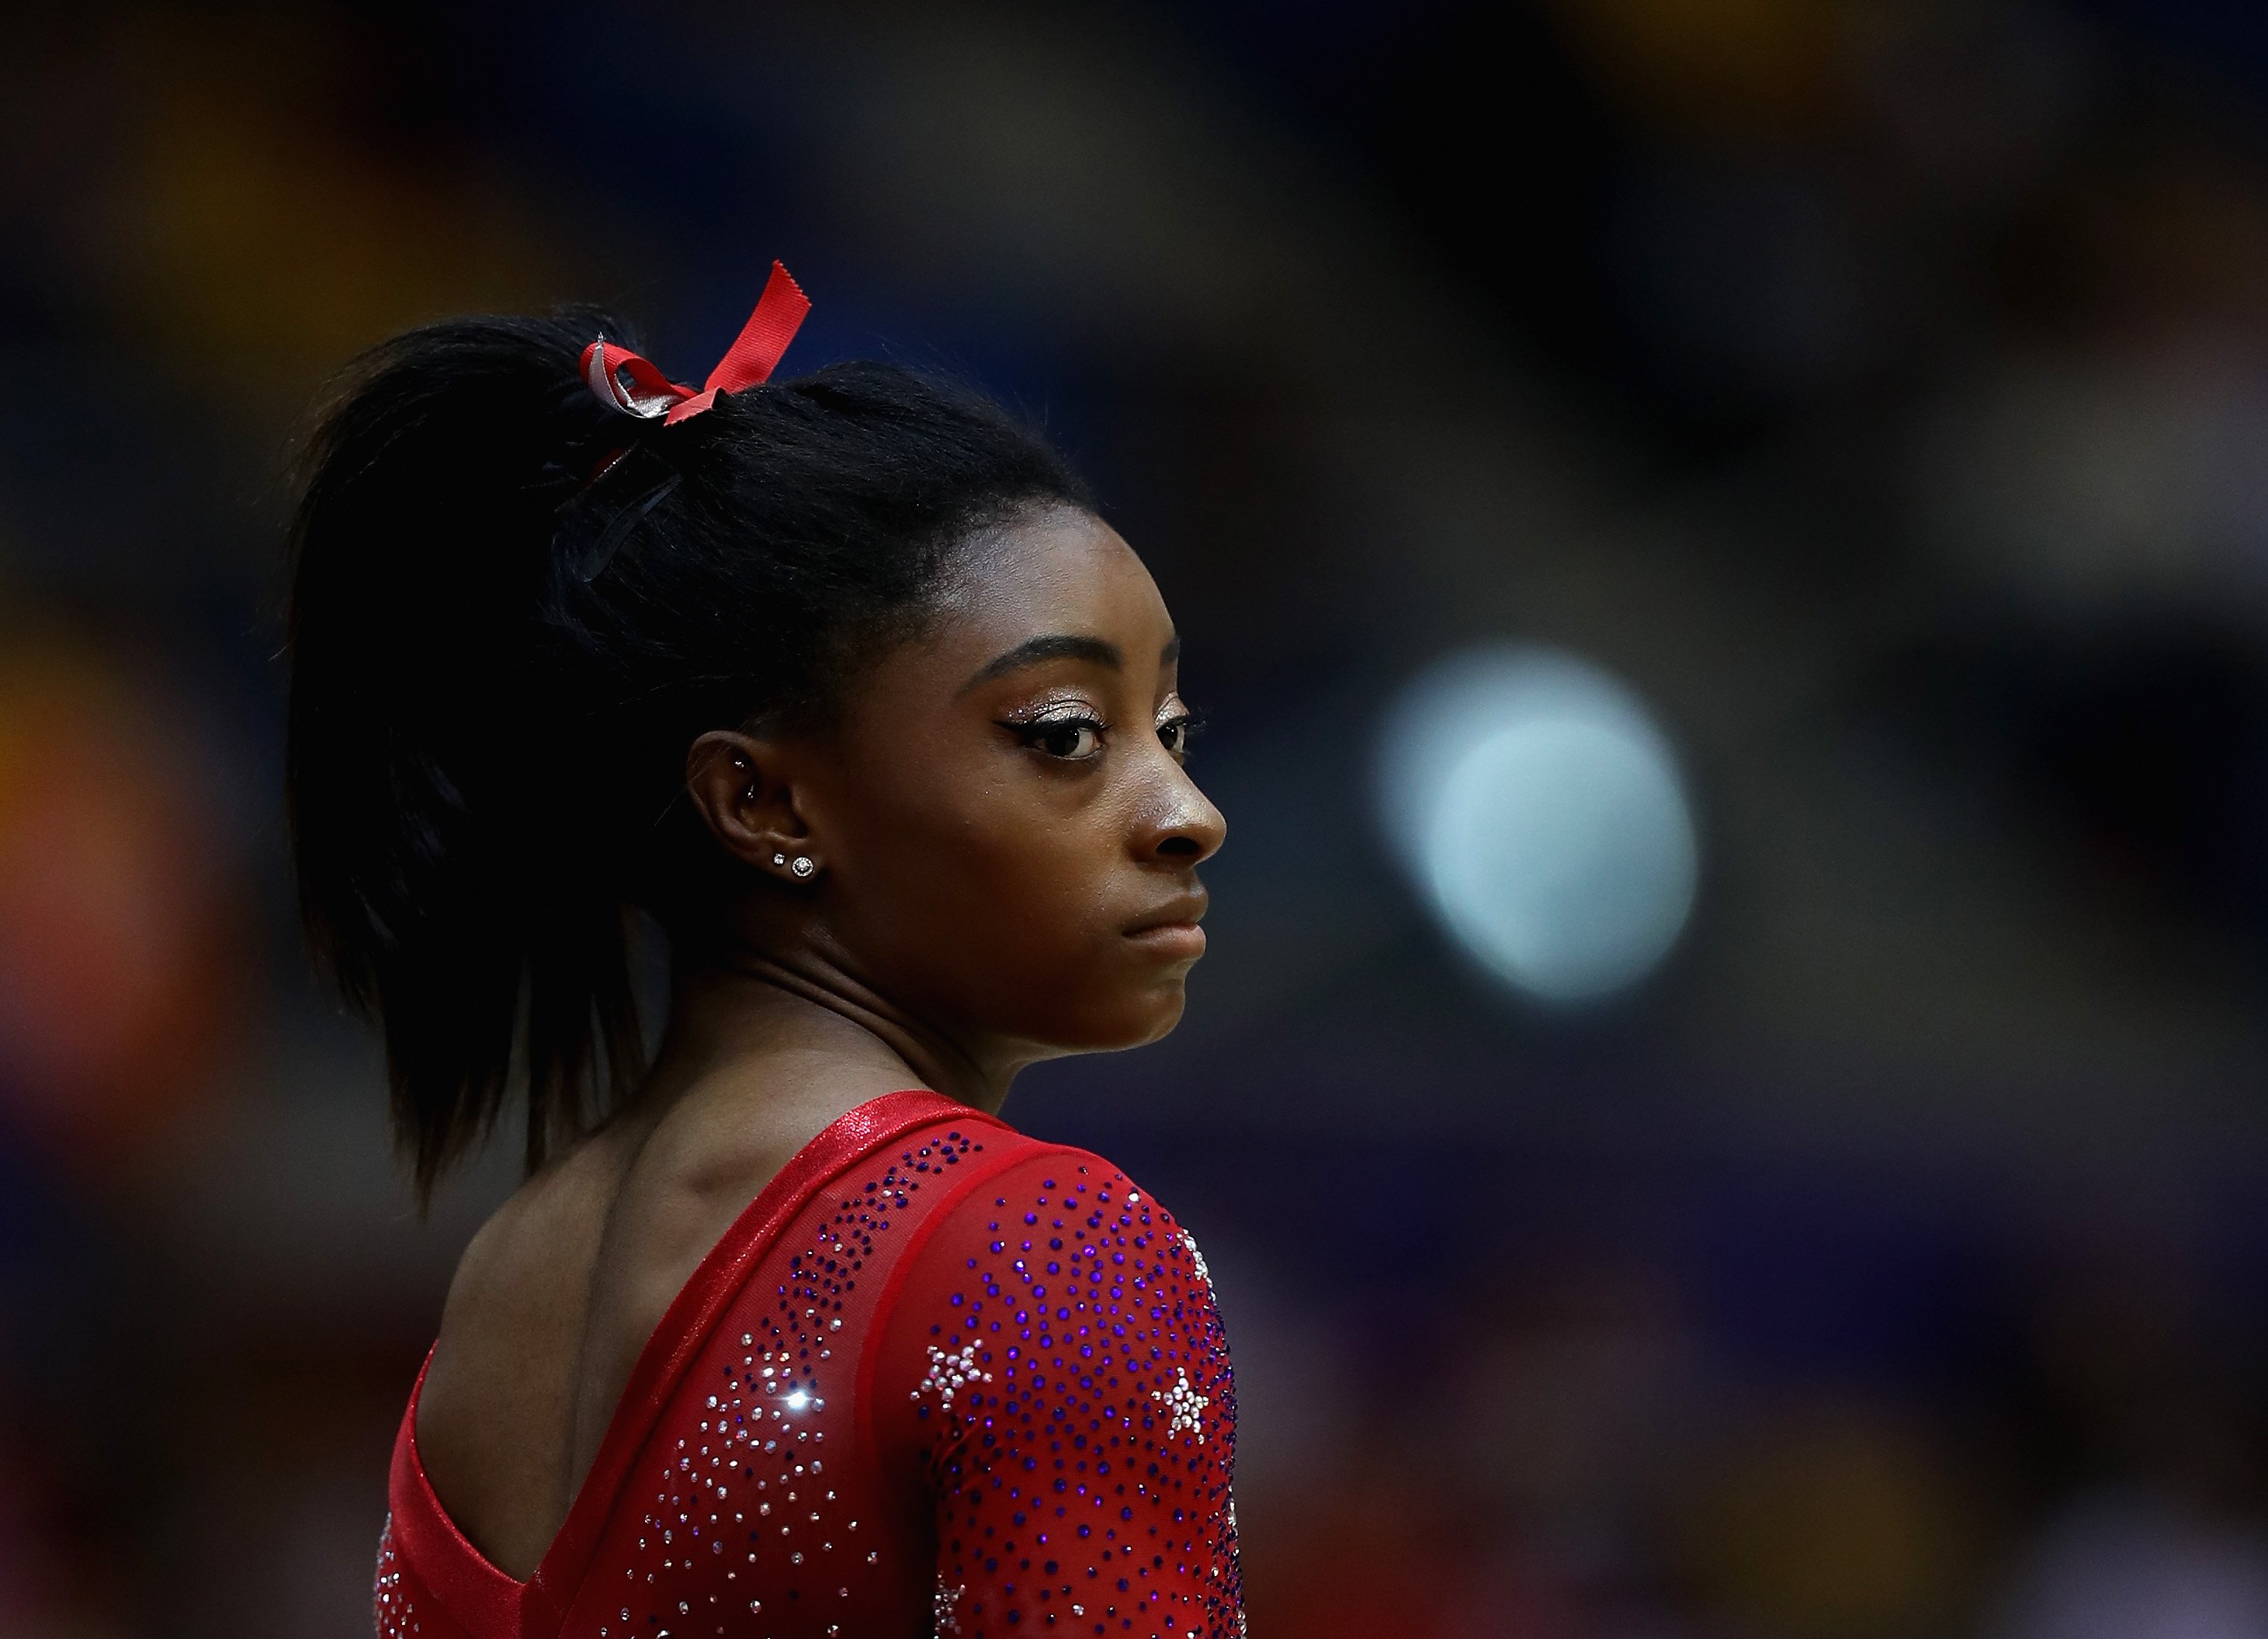  Simone Biles at the 2018 FIG Artistic Gymnastics Championships at Aspire Dome on October 30, 2018 in Doha, Qatar | Photo: Getty Images